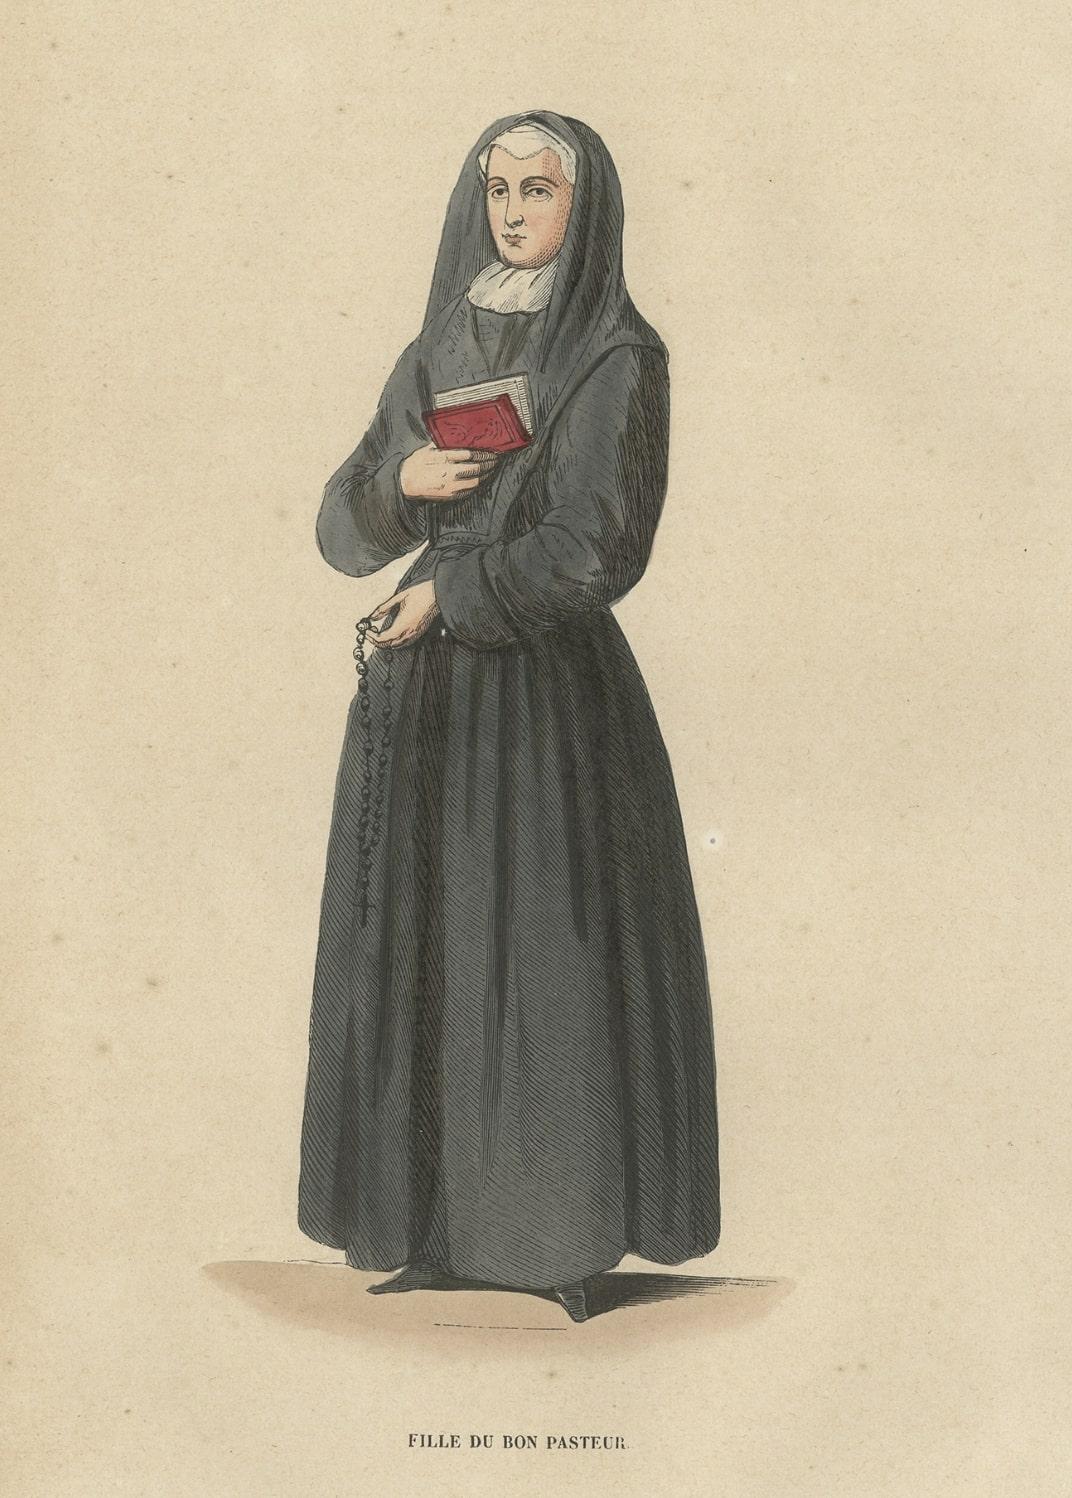 Paper Antique Print of a Sister of the Our Lady of Charity of the Good Shepherd For Sale